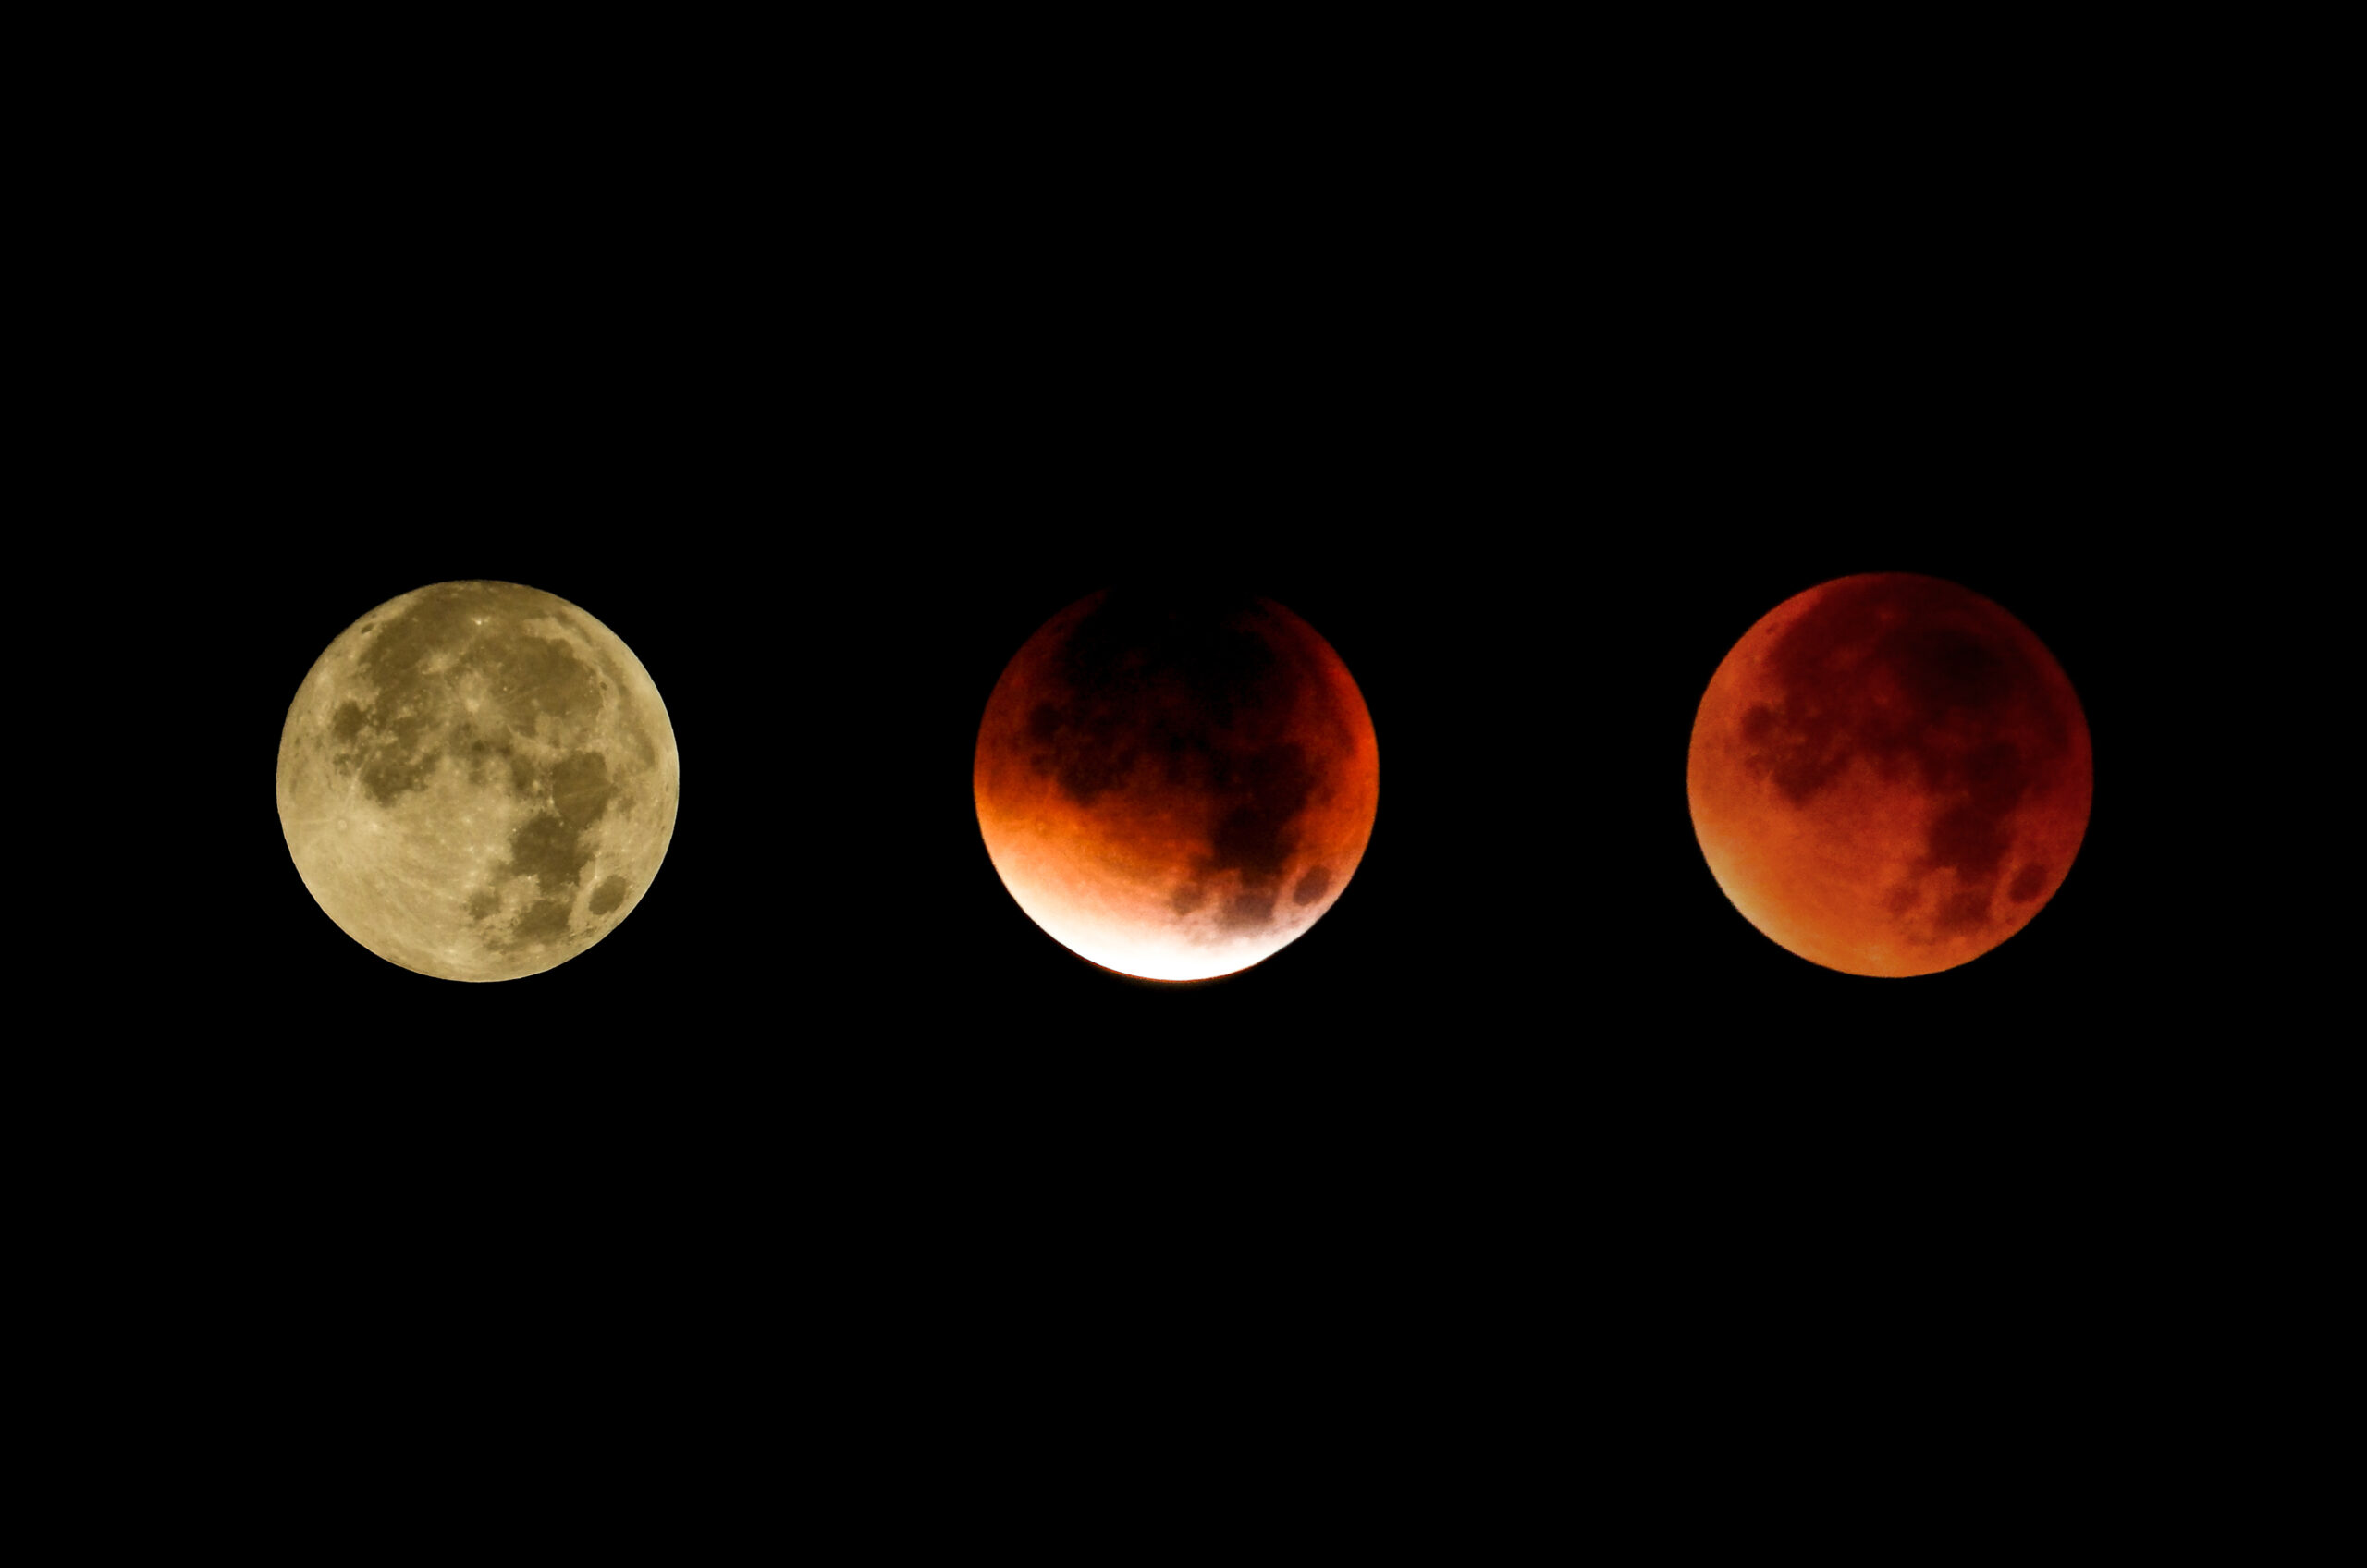 The,Course,Of,The,Supermoon,Lunar,Eclipse,,A,Collage,Of